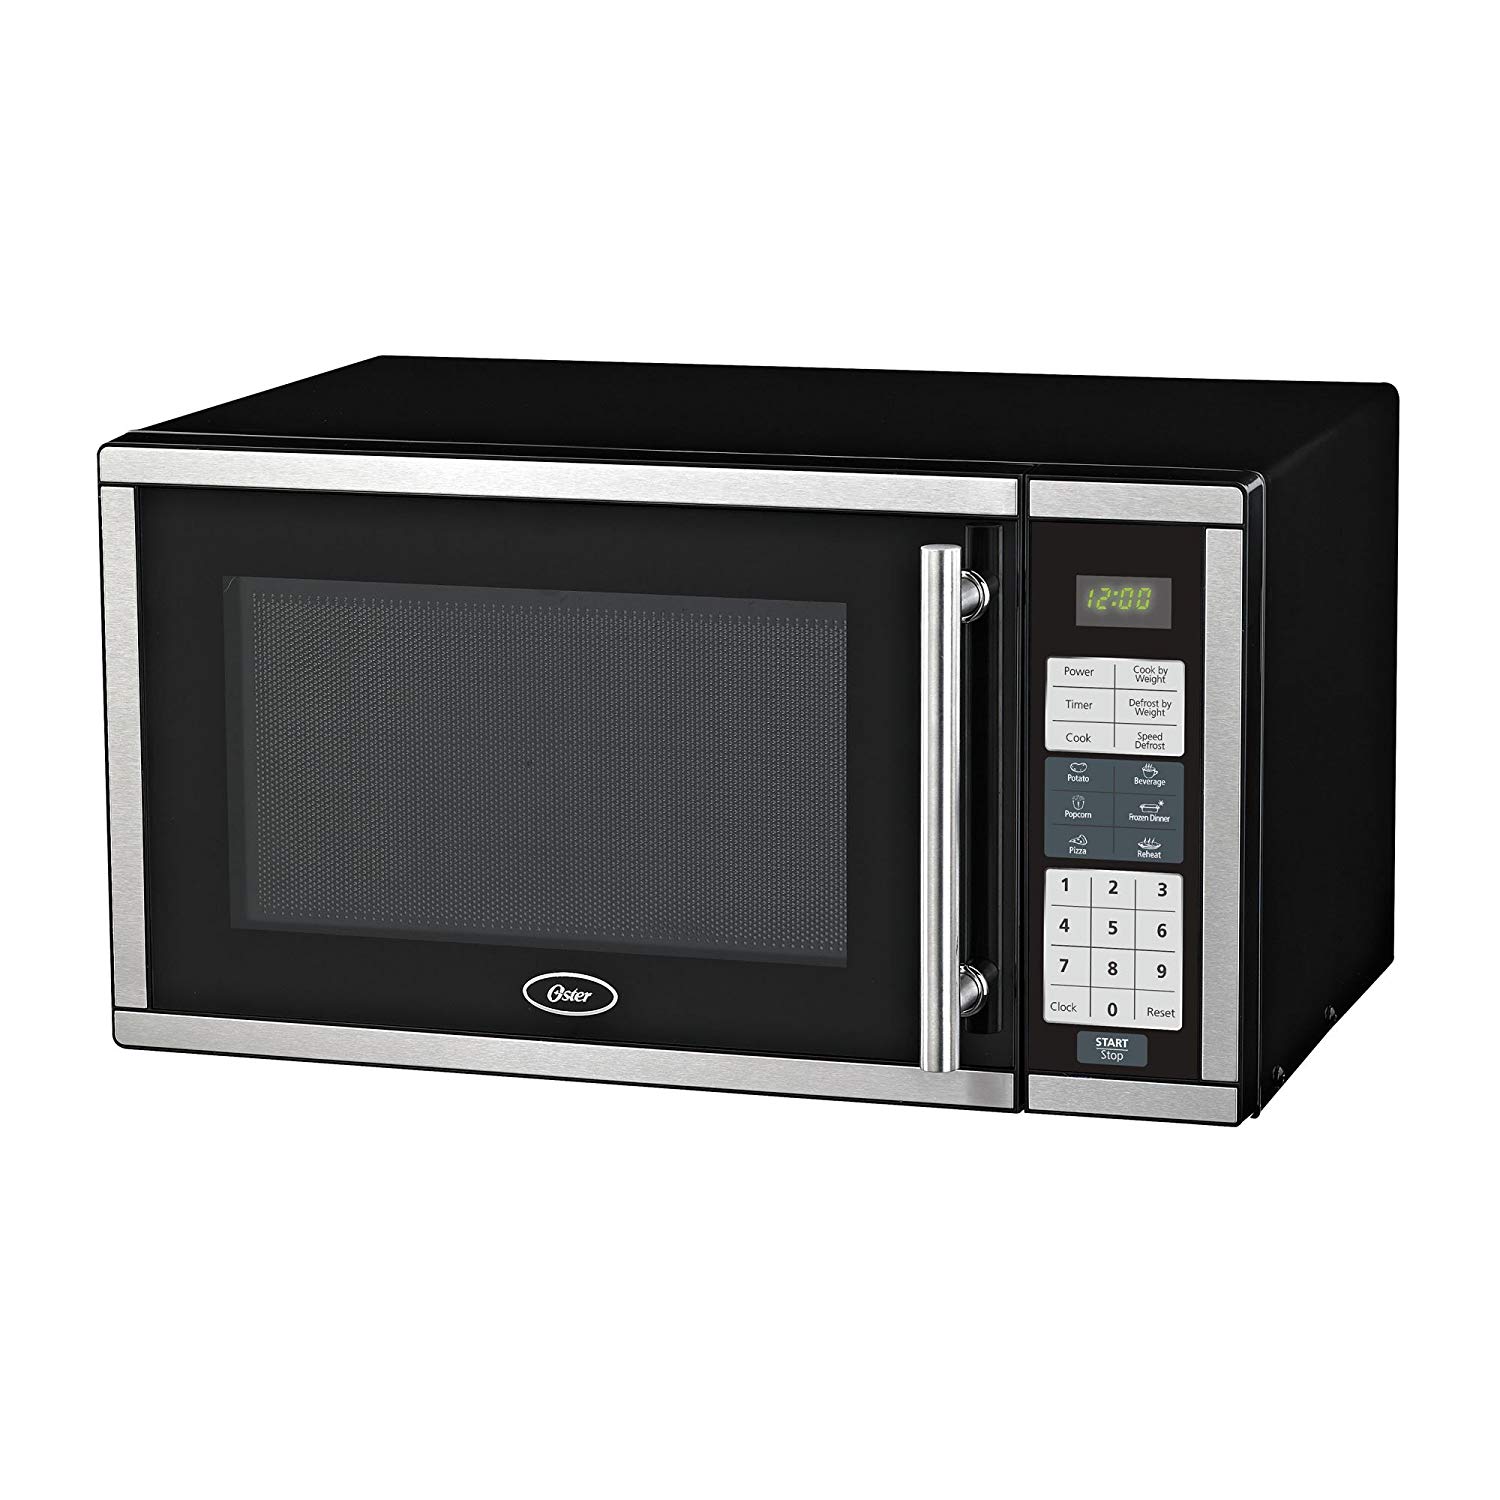 Oster OGB7901 0.9 cu Ft Stainless Steel Microwave Oven